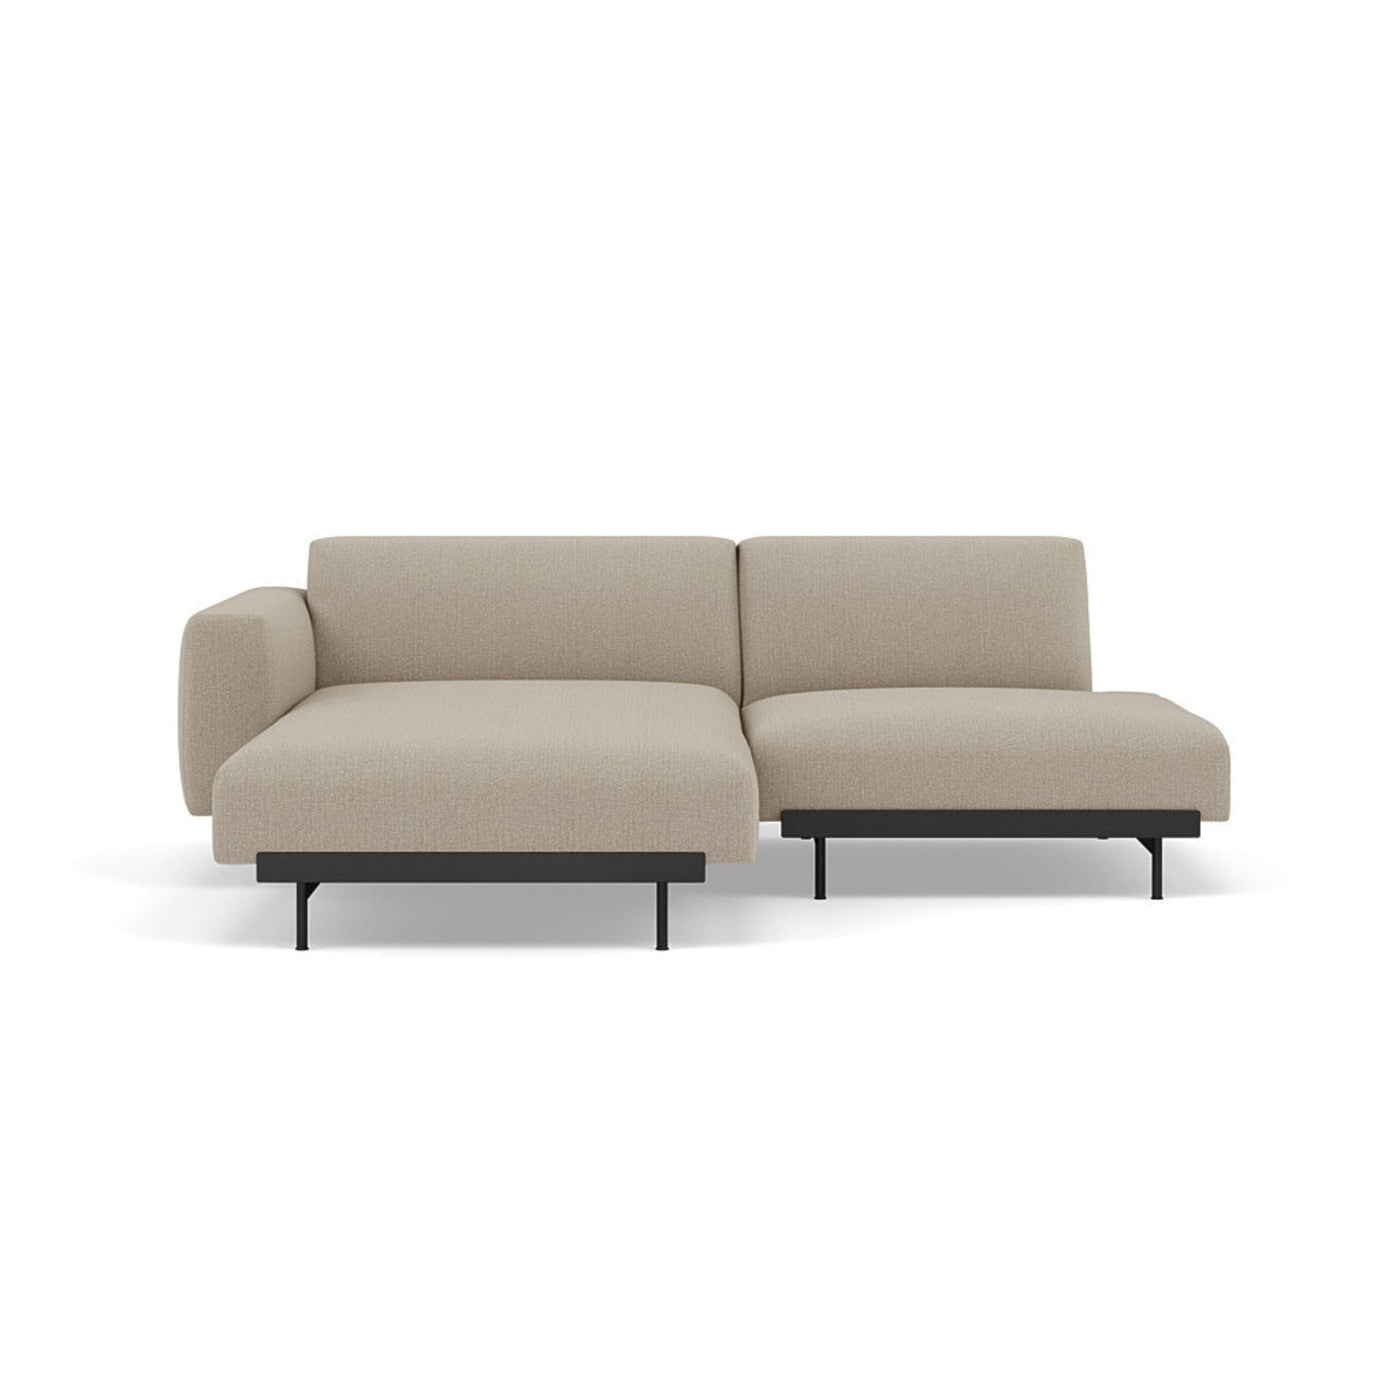 Muuto In Situ Modular 2 Seater Sofa, configuration 6. Made to order from someday designs #colour_clay-10